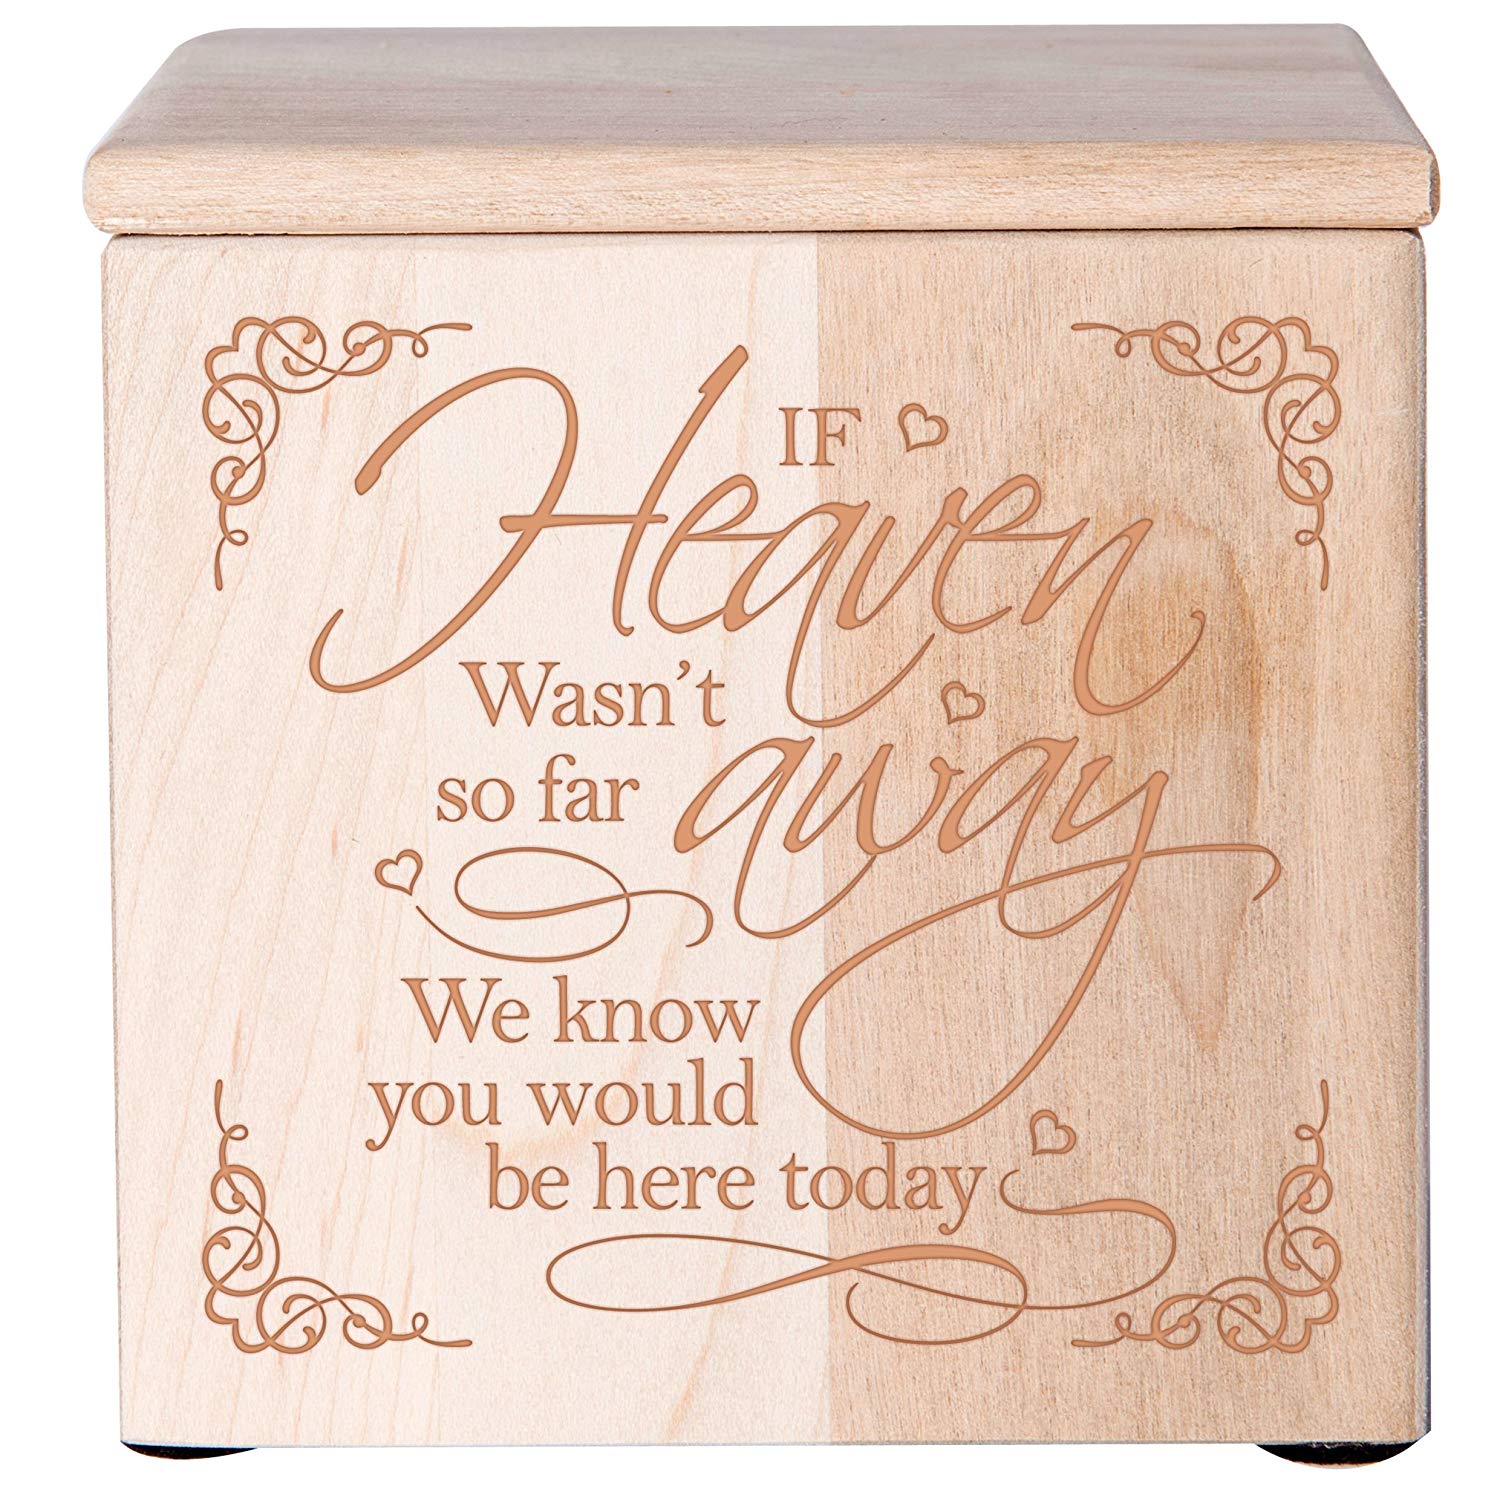 Human Or Pet Cremation Urn - If Heaven Maple